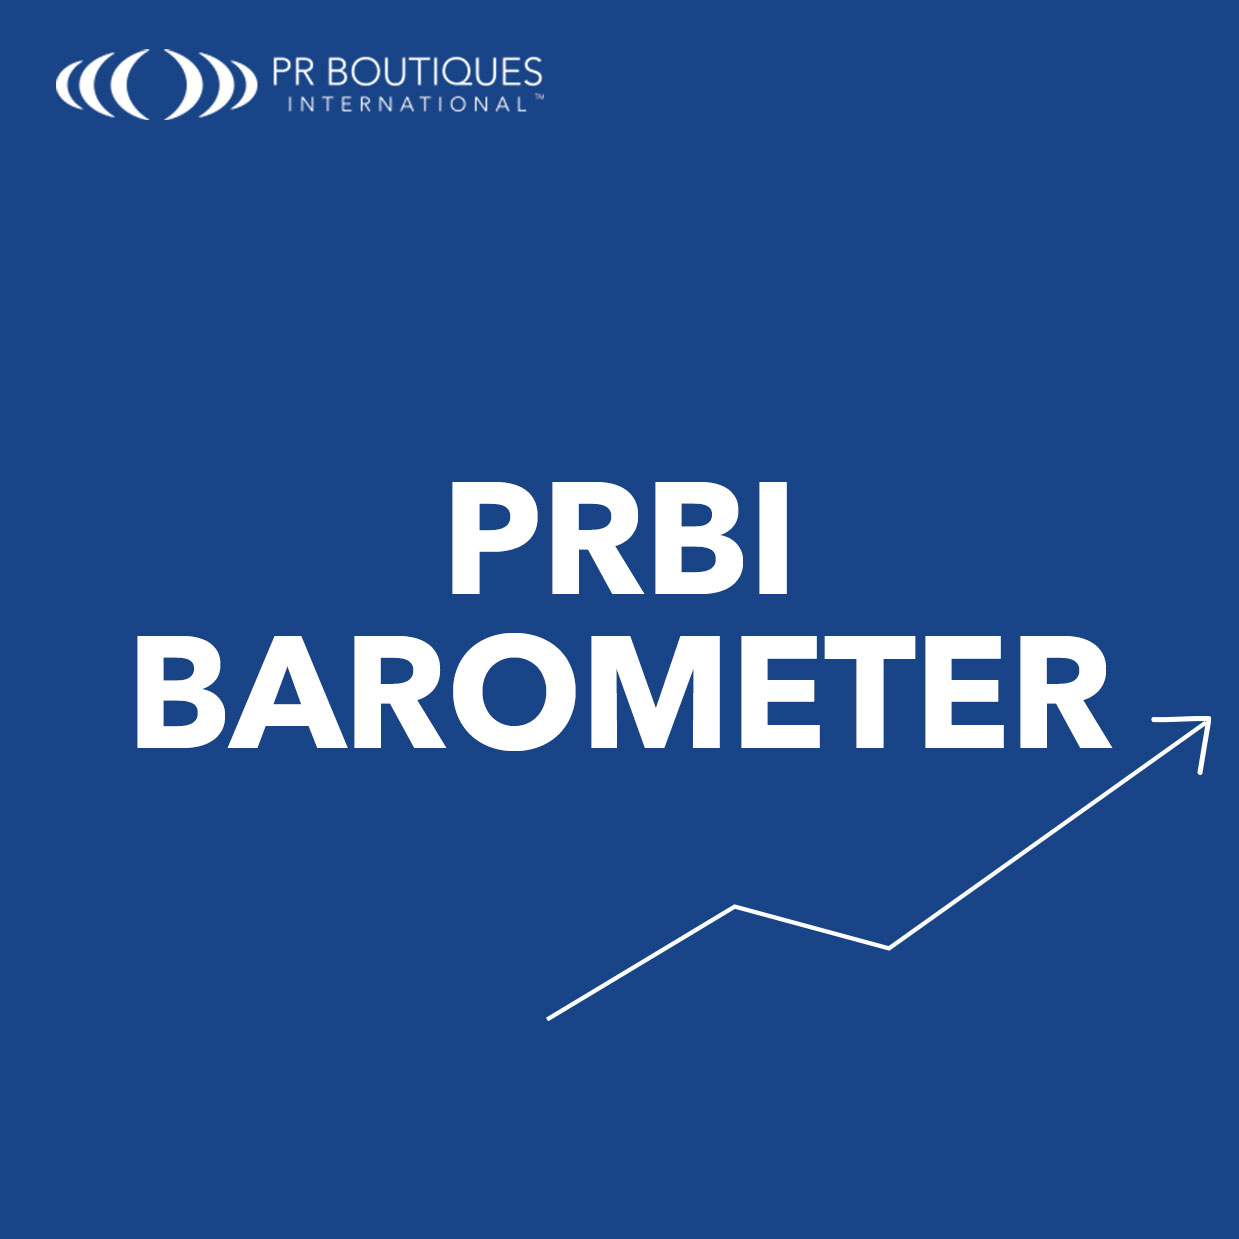 PRBI barometer: even more clients are expecting that agencies are able to show their services’ ROI